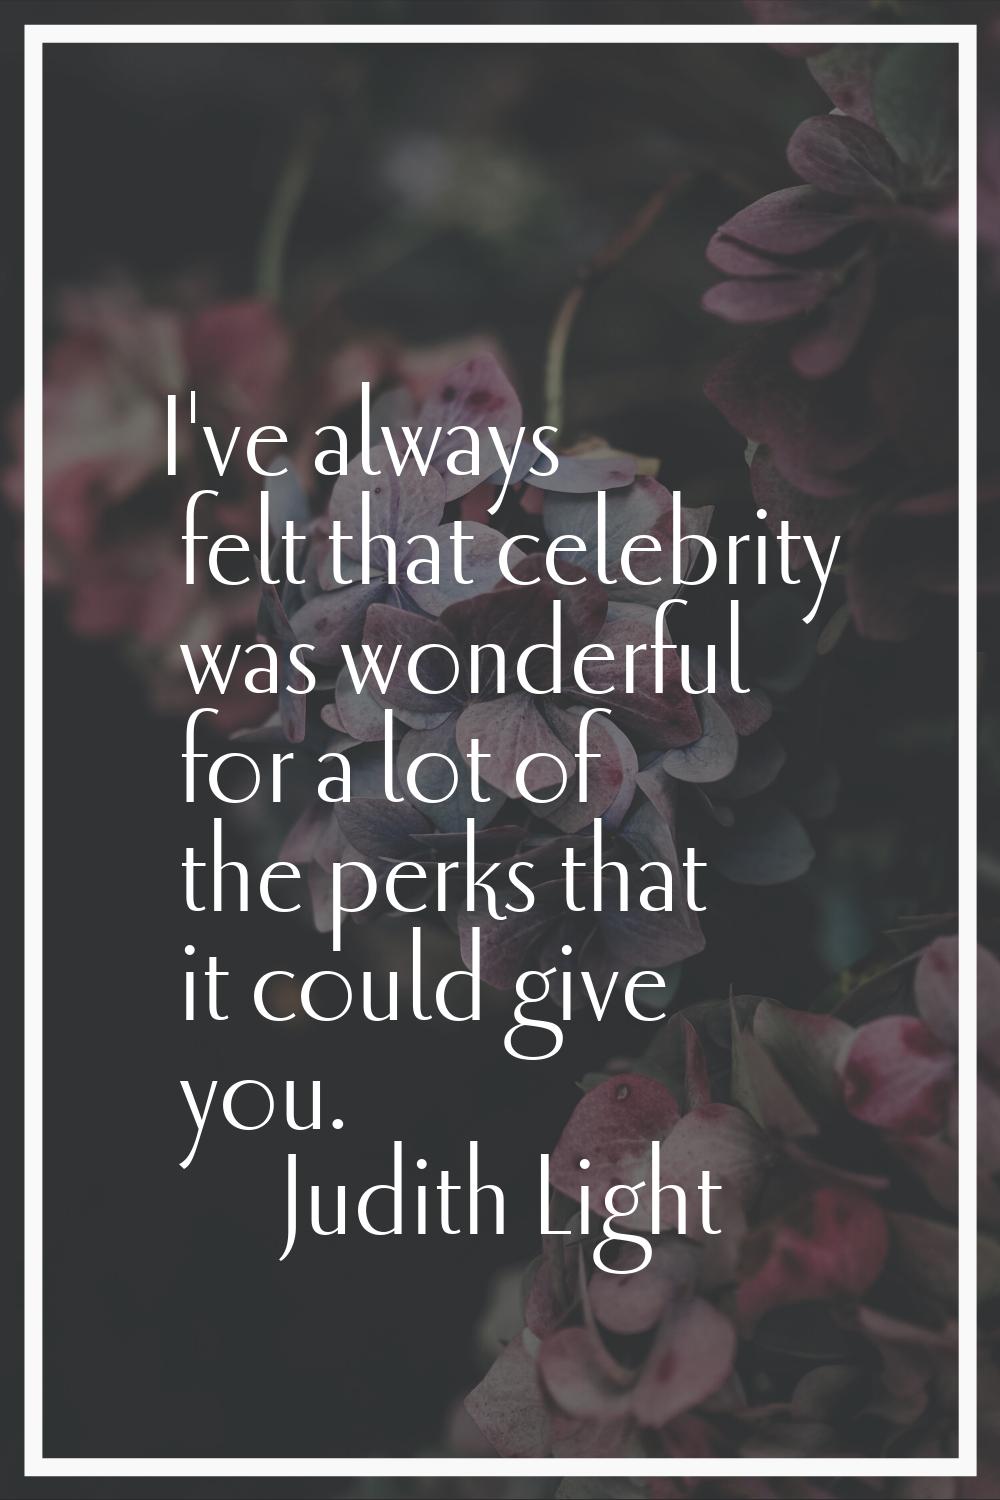 I've always felt that celebrity was wonderful for a lot of the perks that it could give you.